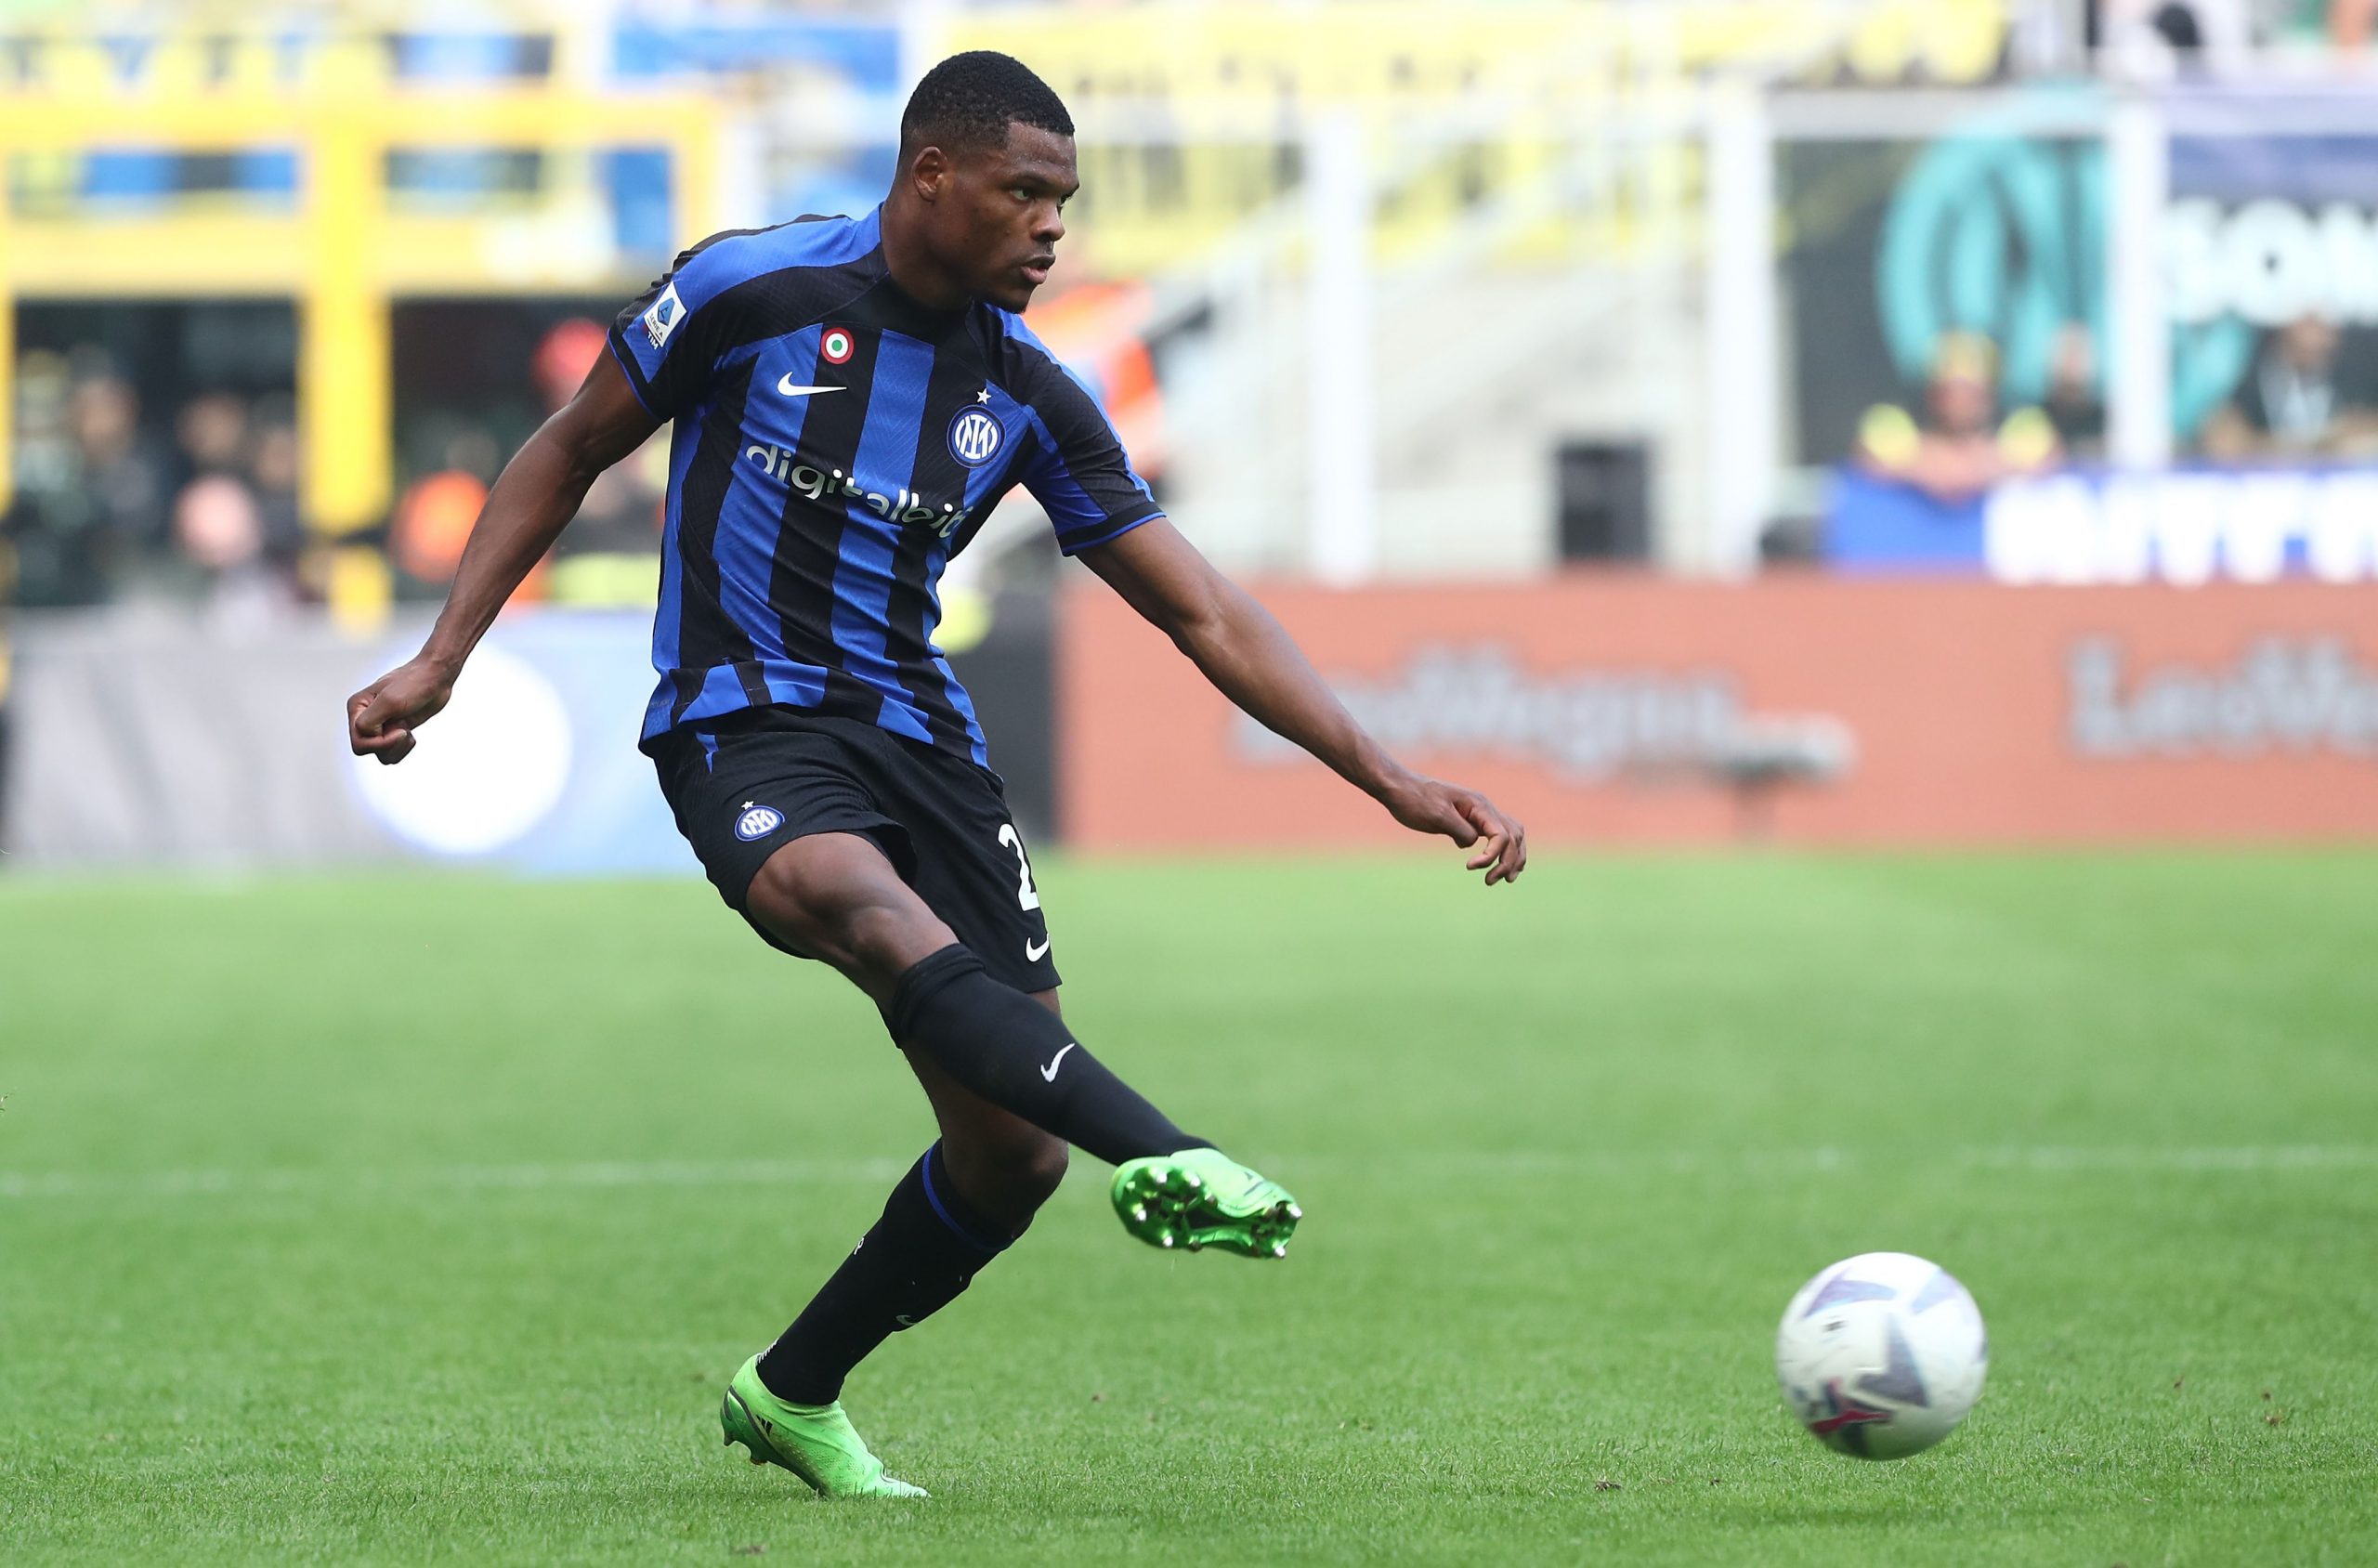 Denzel Dumfries of FC Internazionale in action during the Serie A match between FC Internazionale and US Salernitana at Stadio Giuseppe Meazza on October 16, 2022 in Milan, Italy